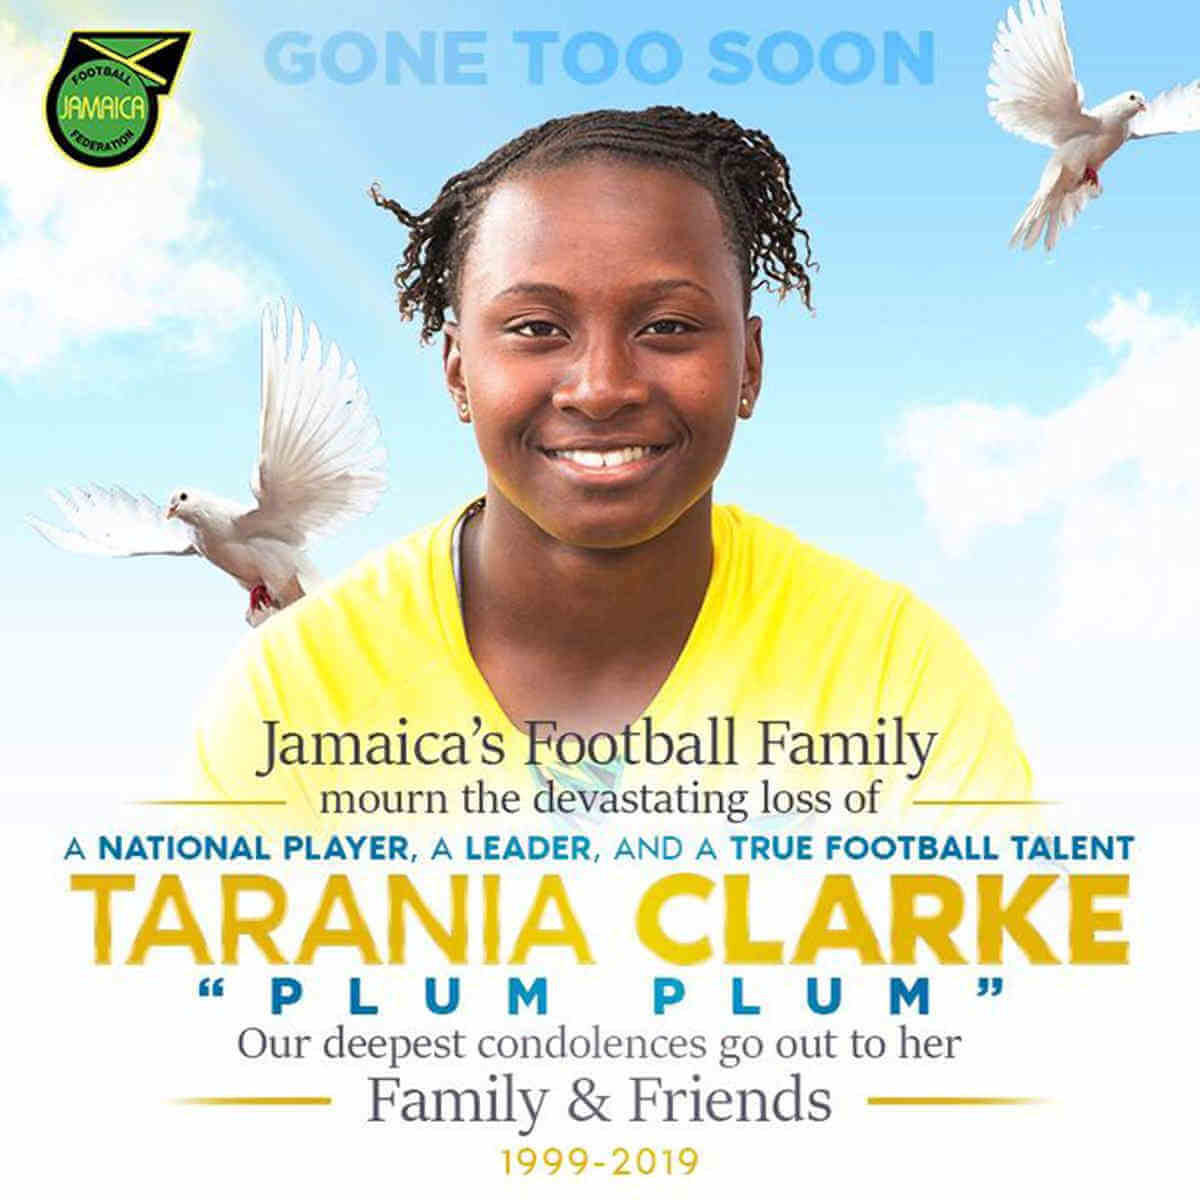 Reggae Girlz lost one of their own